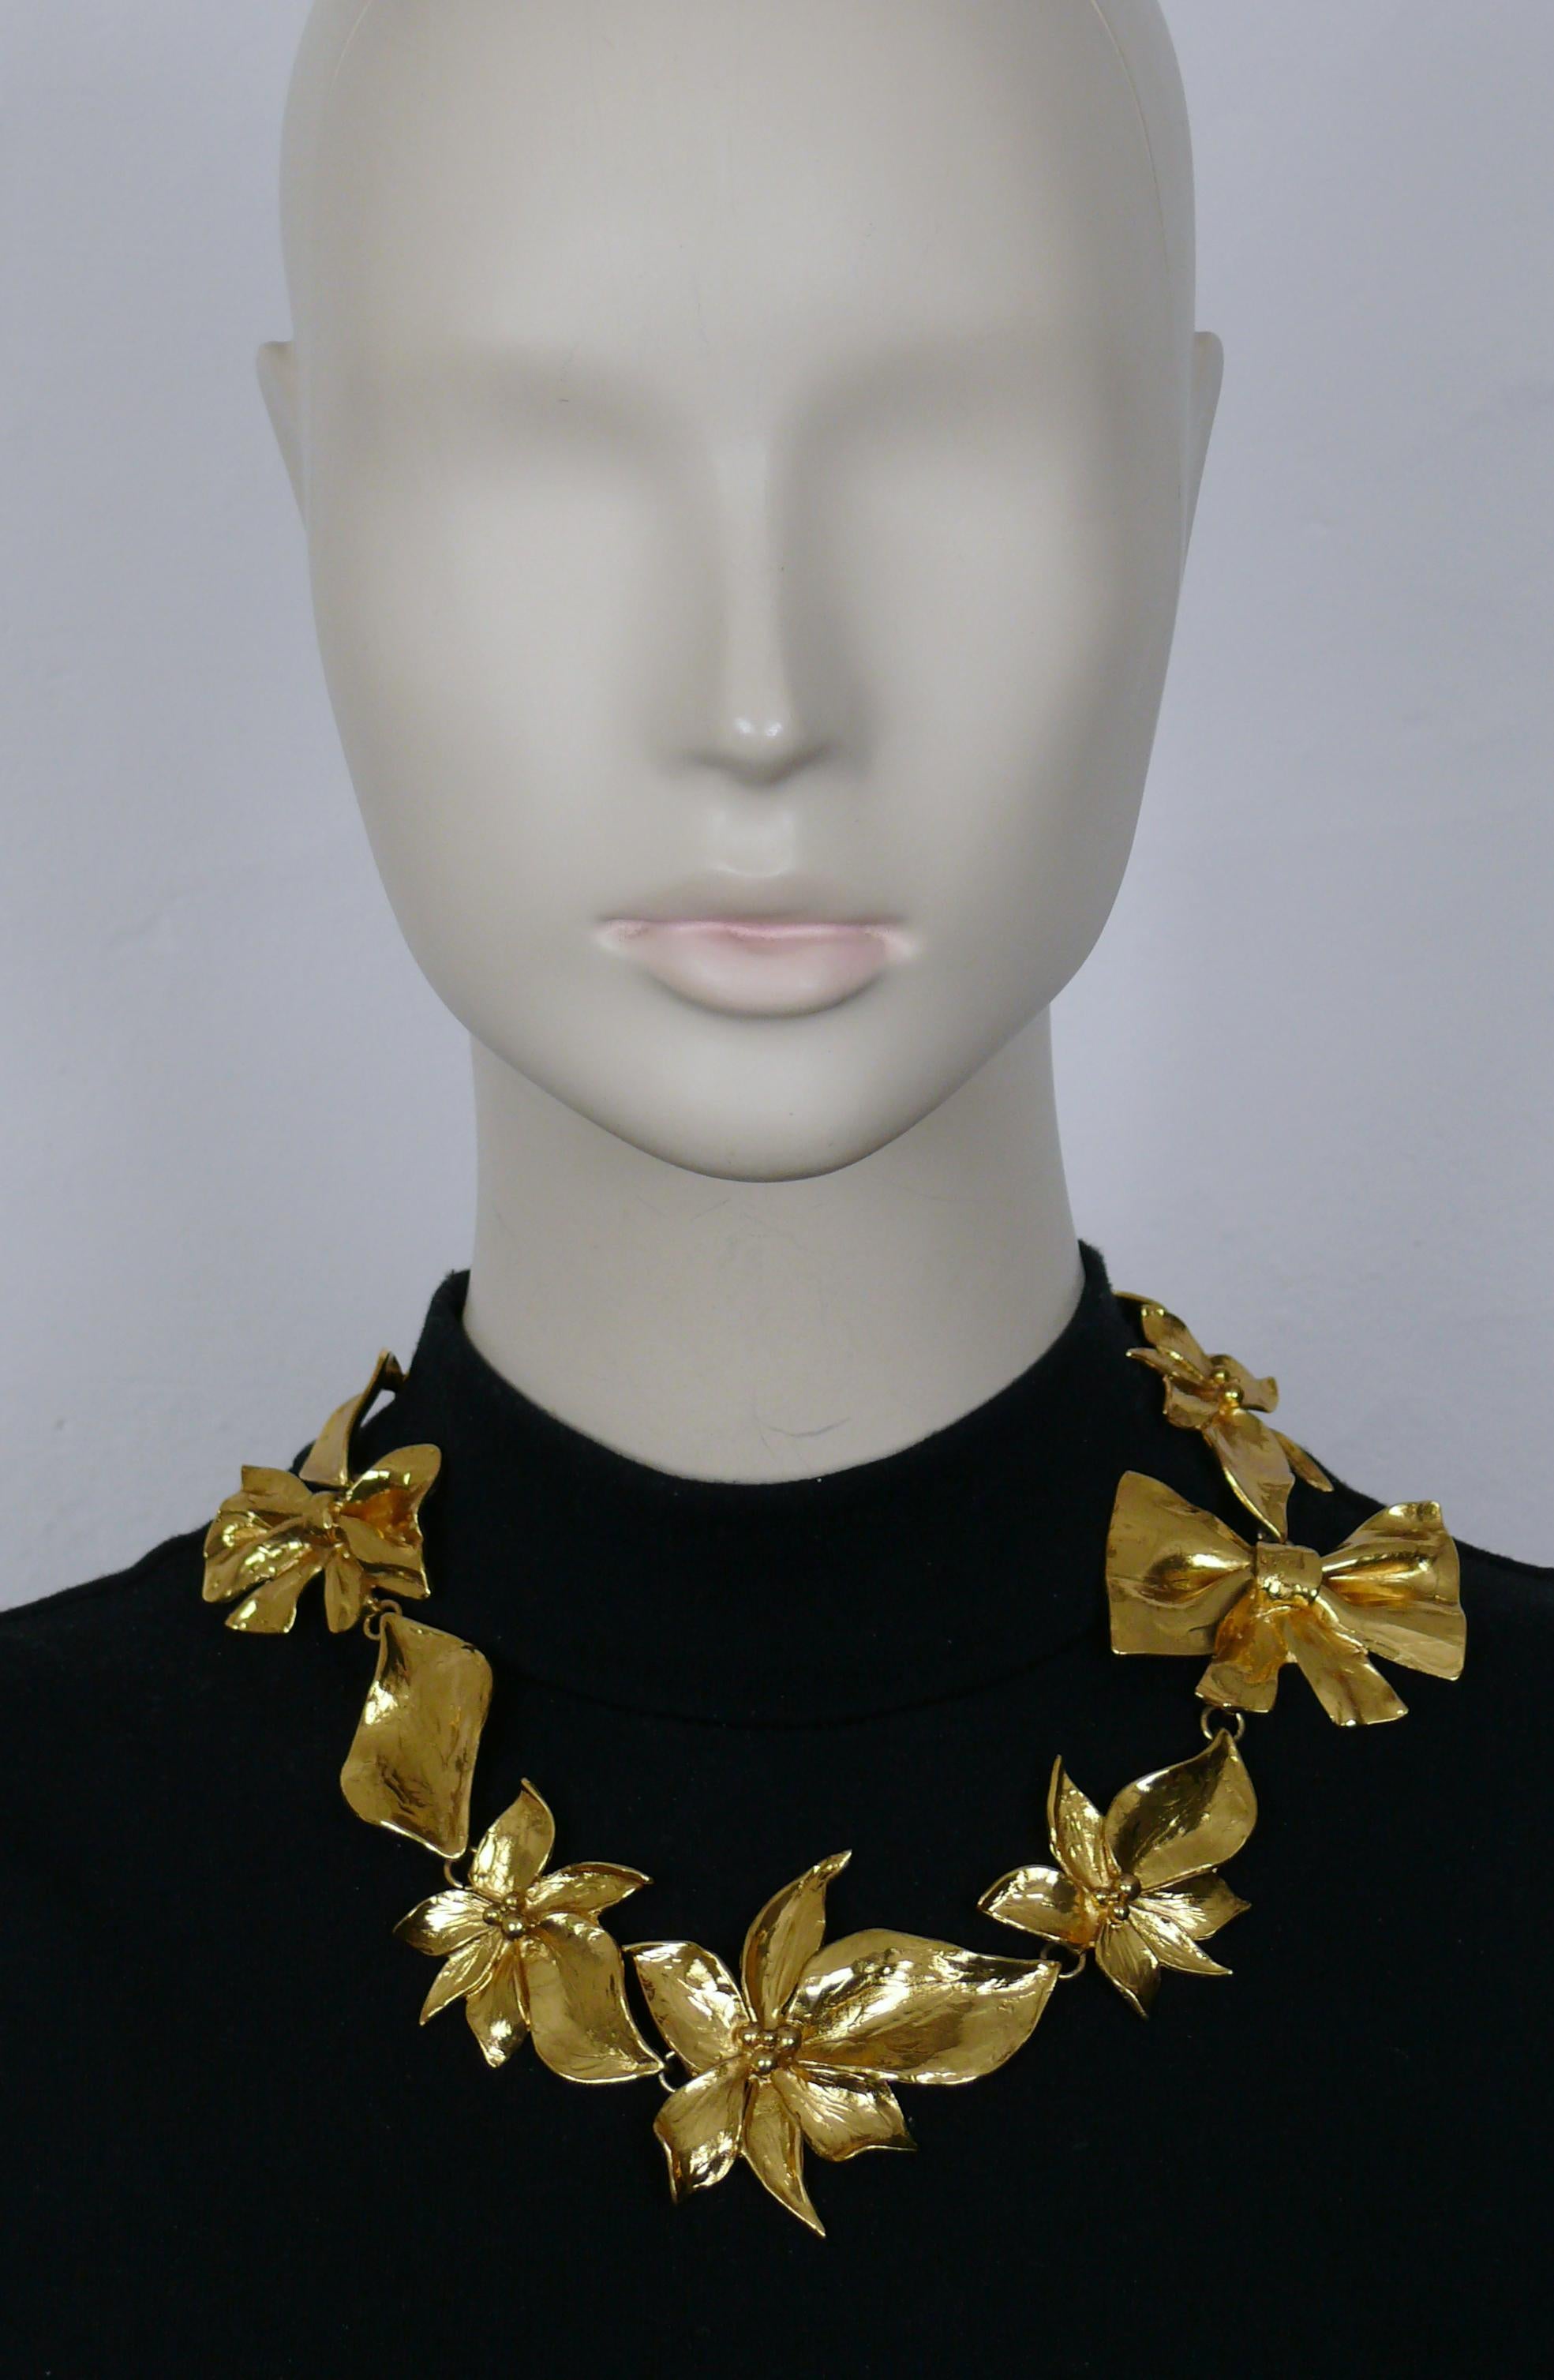 JEAN LOUIS SCHERRER vintage gold tone necklace featuring flower and bow links.

Ajustable spring clasp closure.

Embossed SCHERRER Paris Made in France.

Indicative measurements : adjustable length from approx. 49 cm (19.29 inches) to approx 52 cm